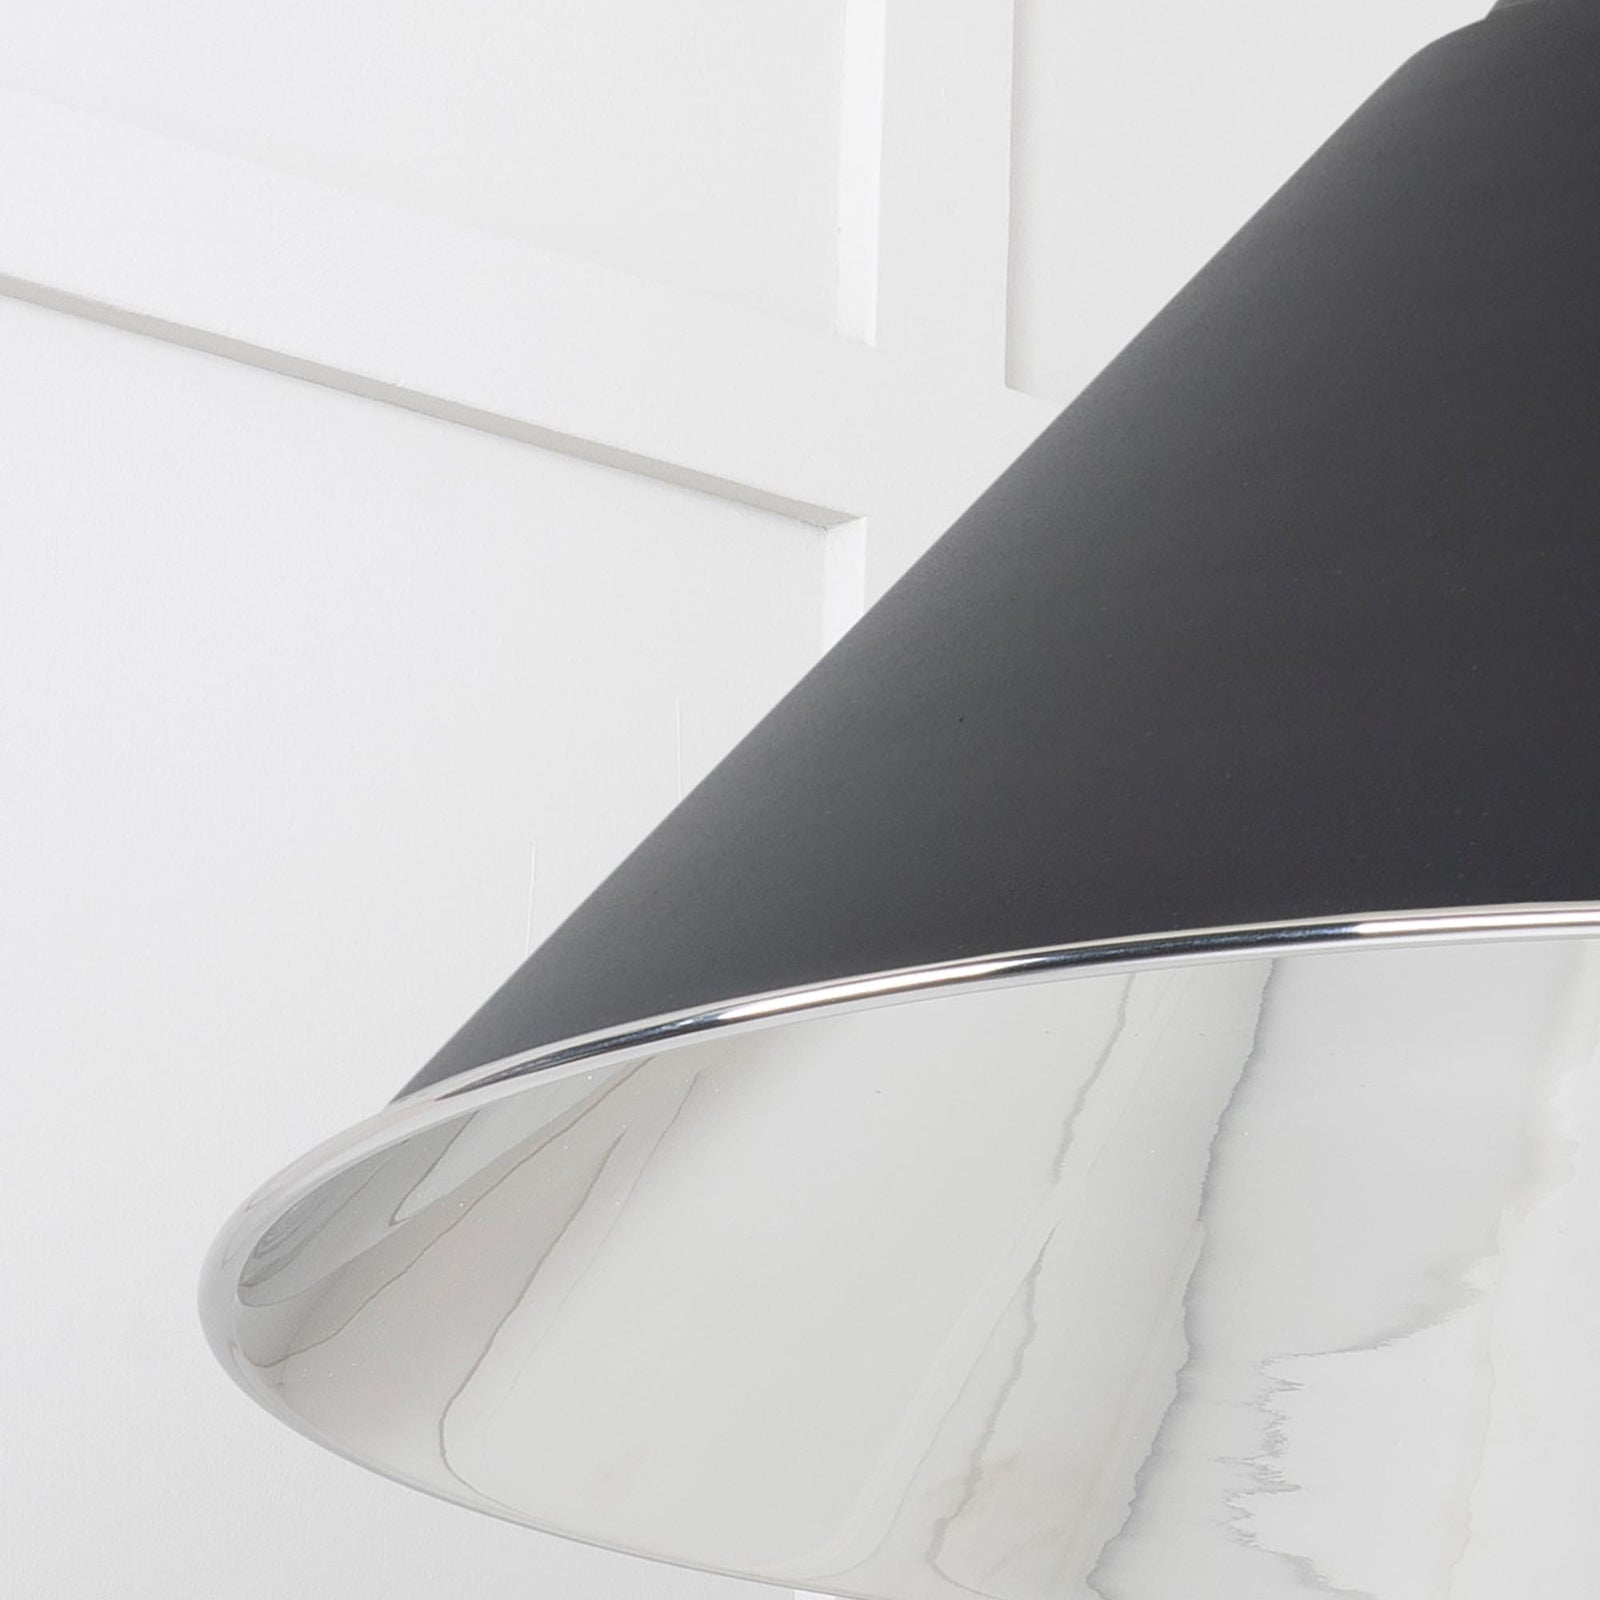 SHOW Close Up Image of Hockley Ceiling Light in Elan Black in Smooth Nickel